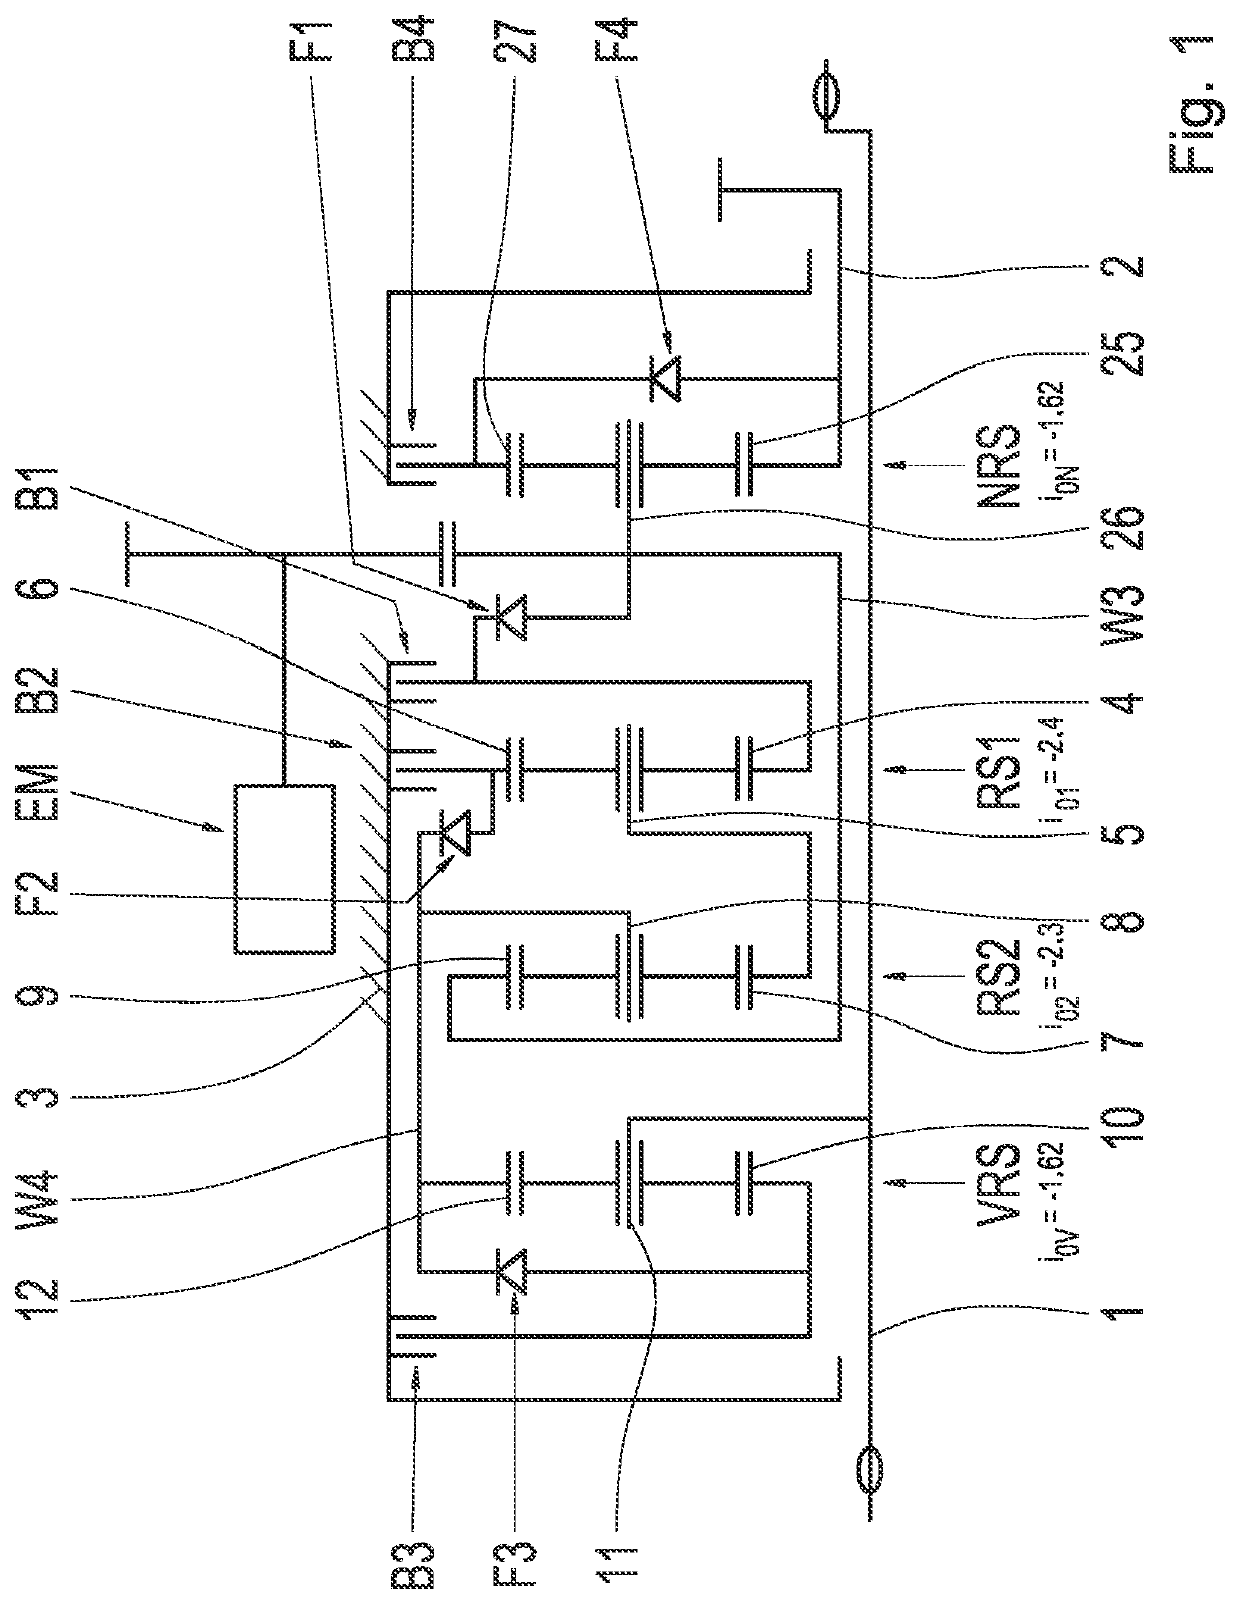 Planet-type multi-stage transmission for a bicycle or pedelec